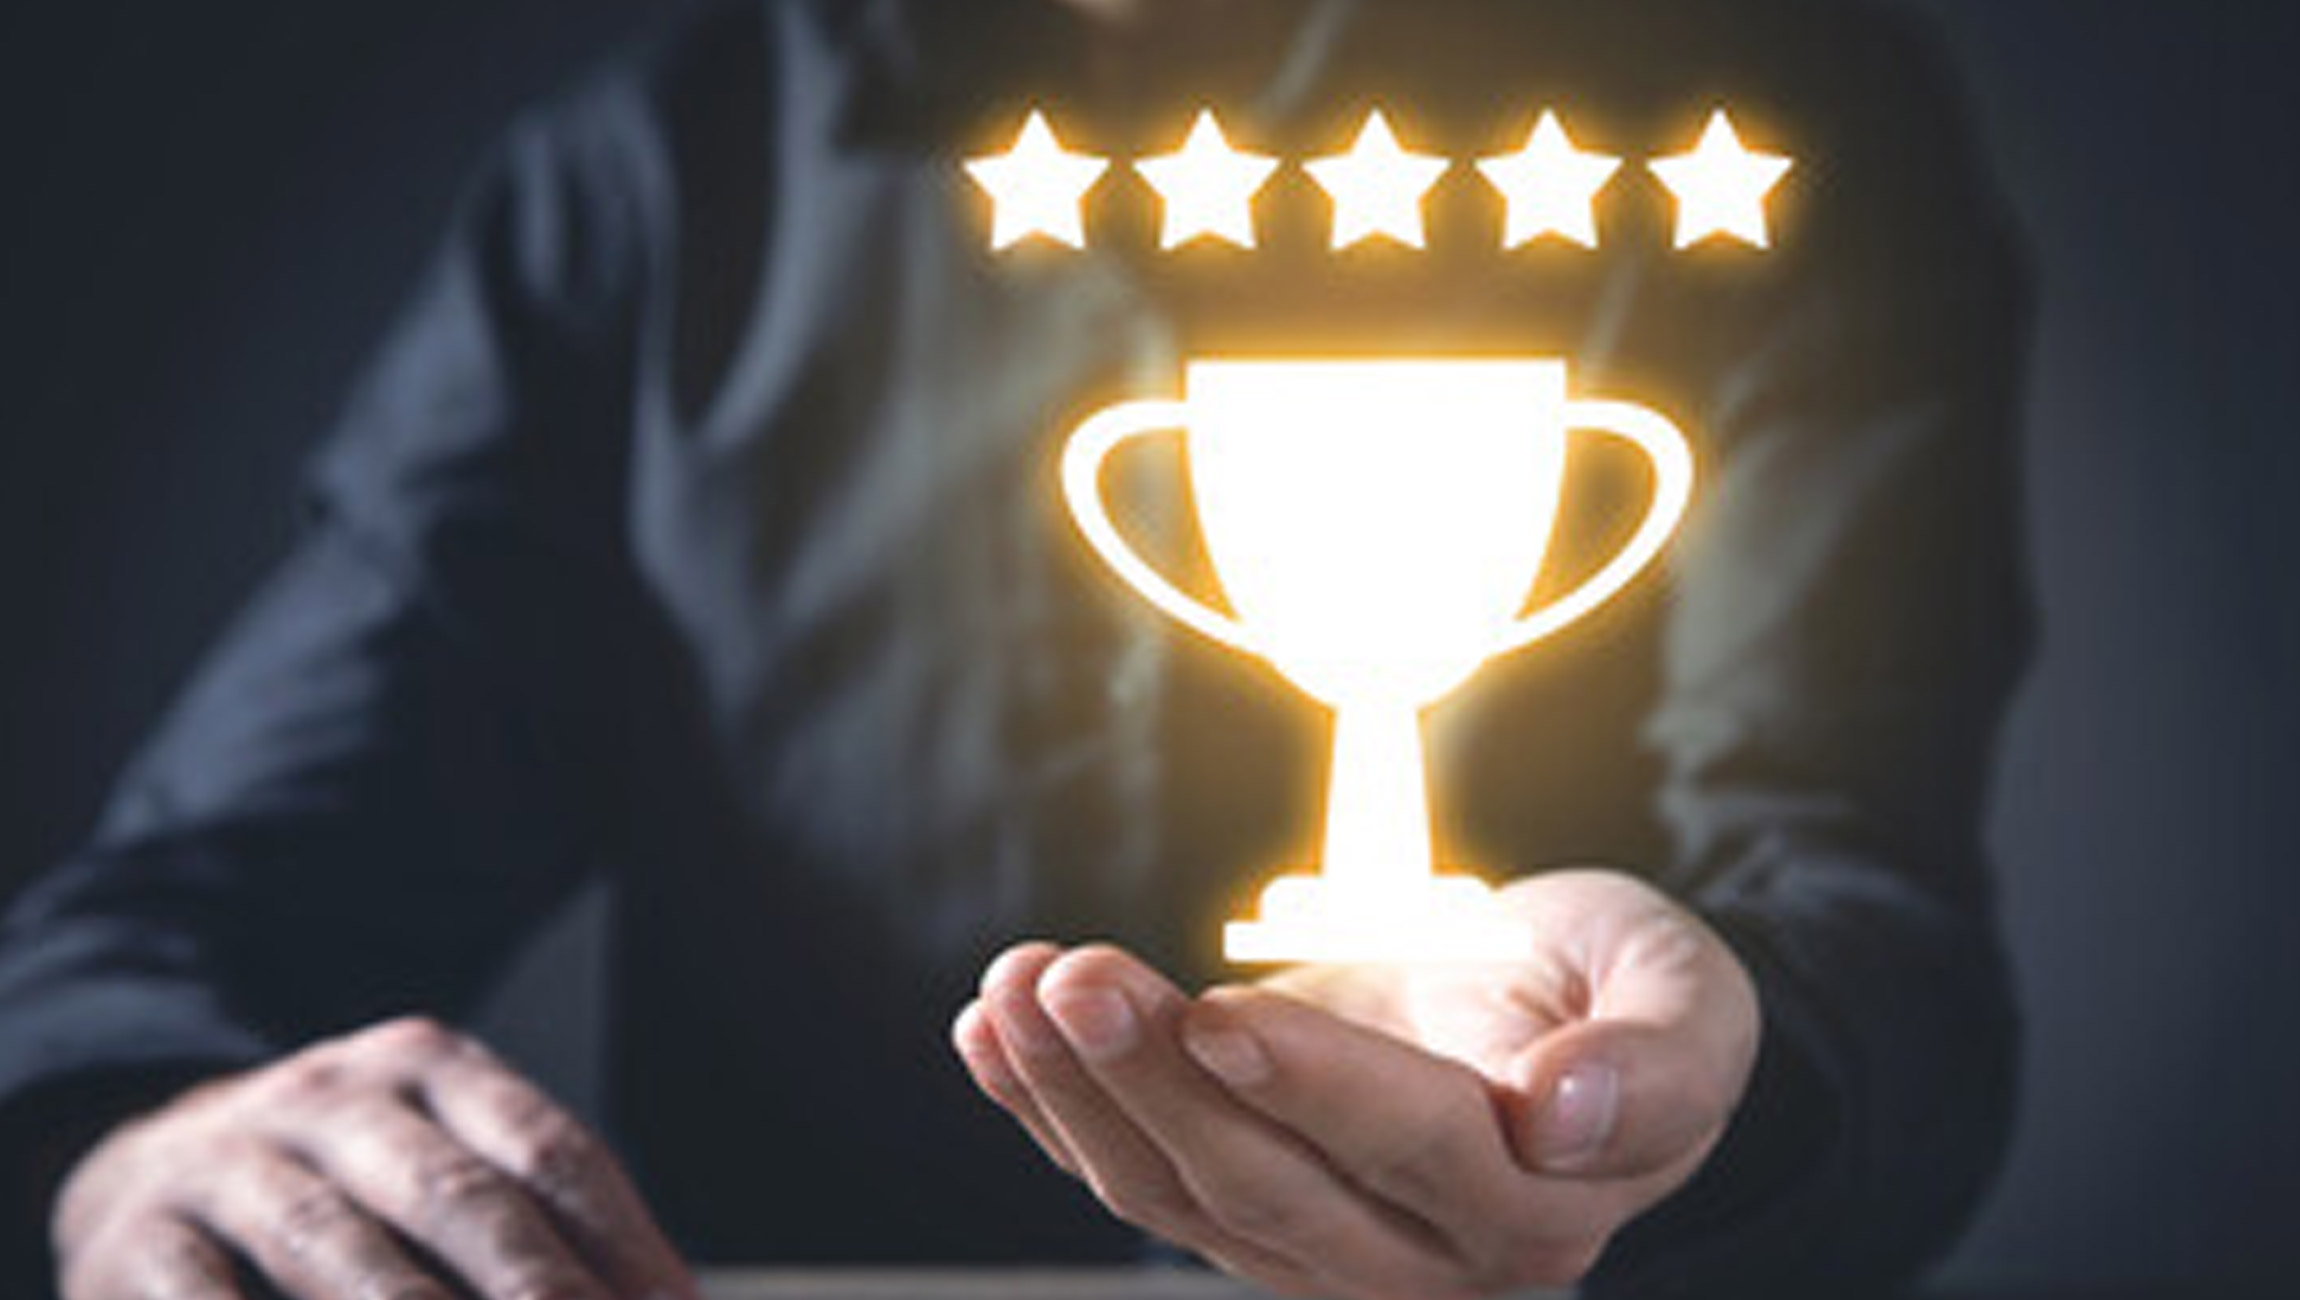 Adaptiva Named as Finalist in 2023 Stevie Awards for Sales & Customer Service